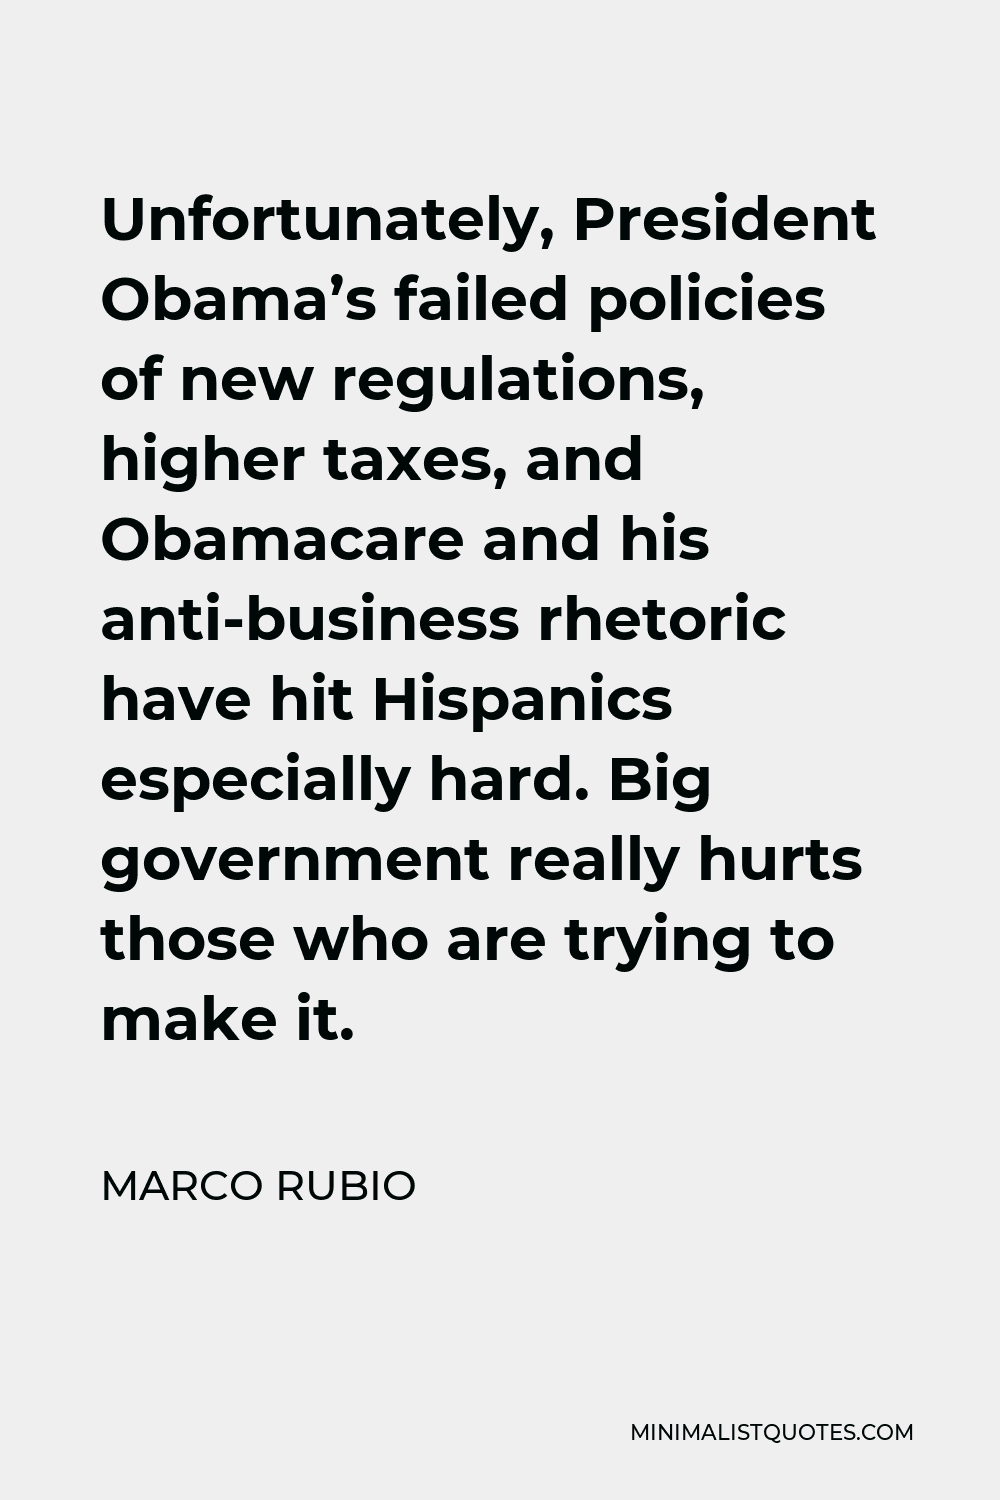 Marco Rubio Quote - Unfortunately, President Obama’s failed policies of new regulations, higher taxes, and Obamacare and his anti-business rhetoric have hit Hispanics especially hard. Big government really hurts those who are trying to make it.